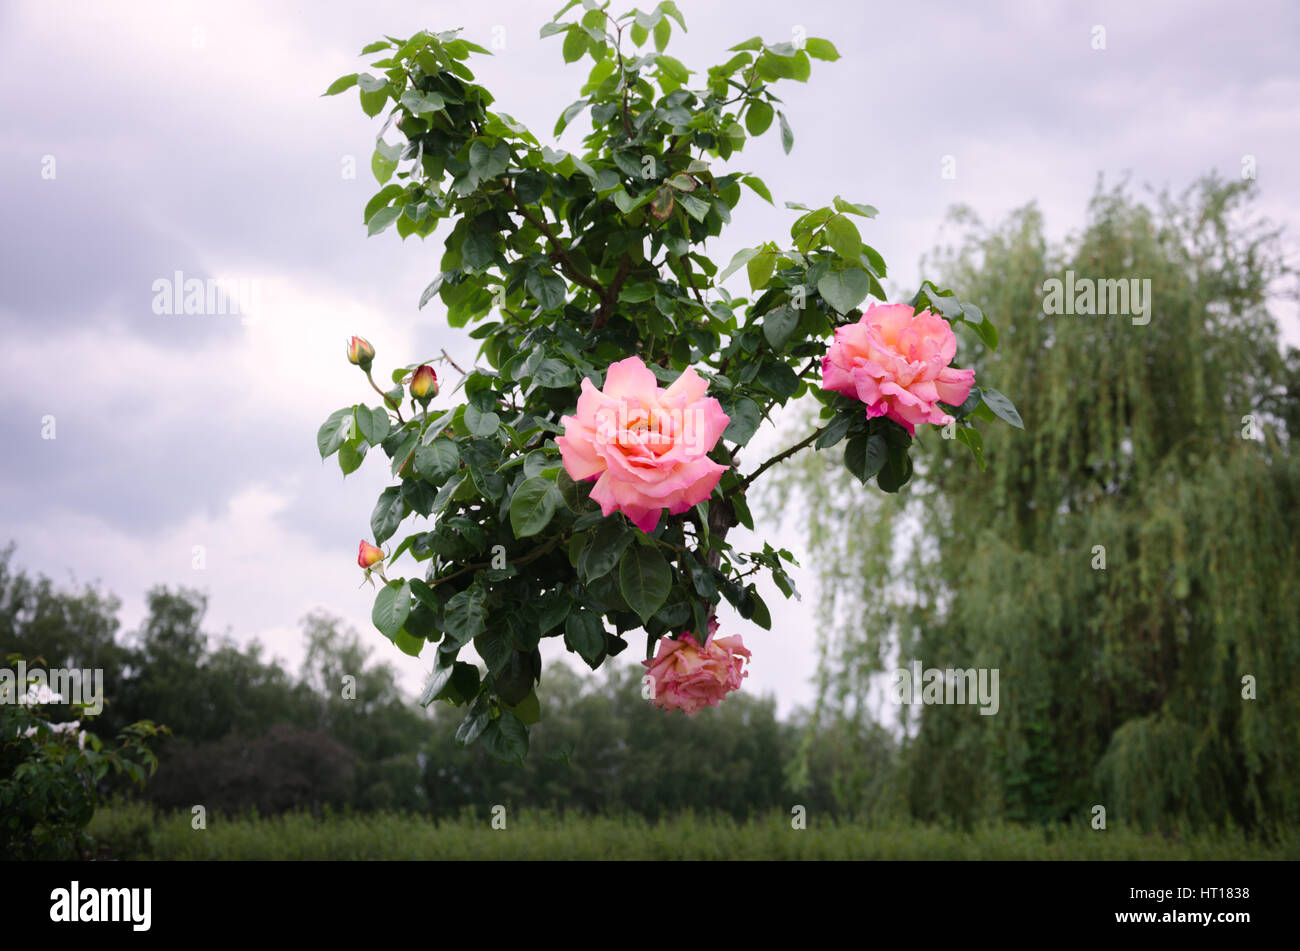 beautiful flowering shrub roses against the sky and weeping willow Stock Photo